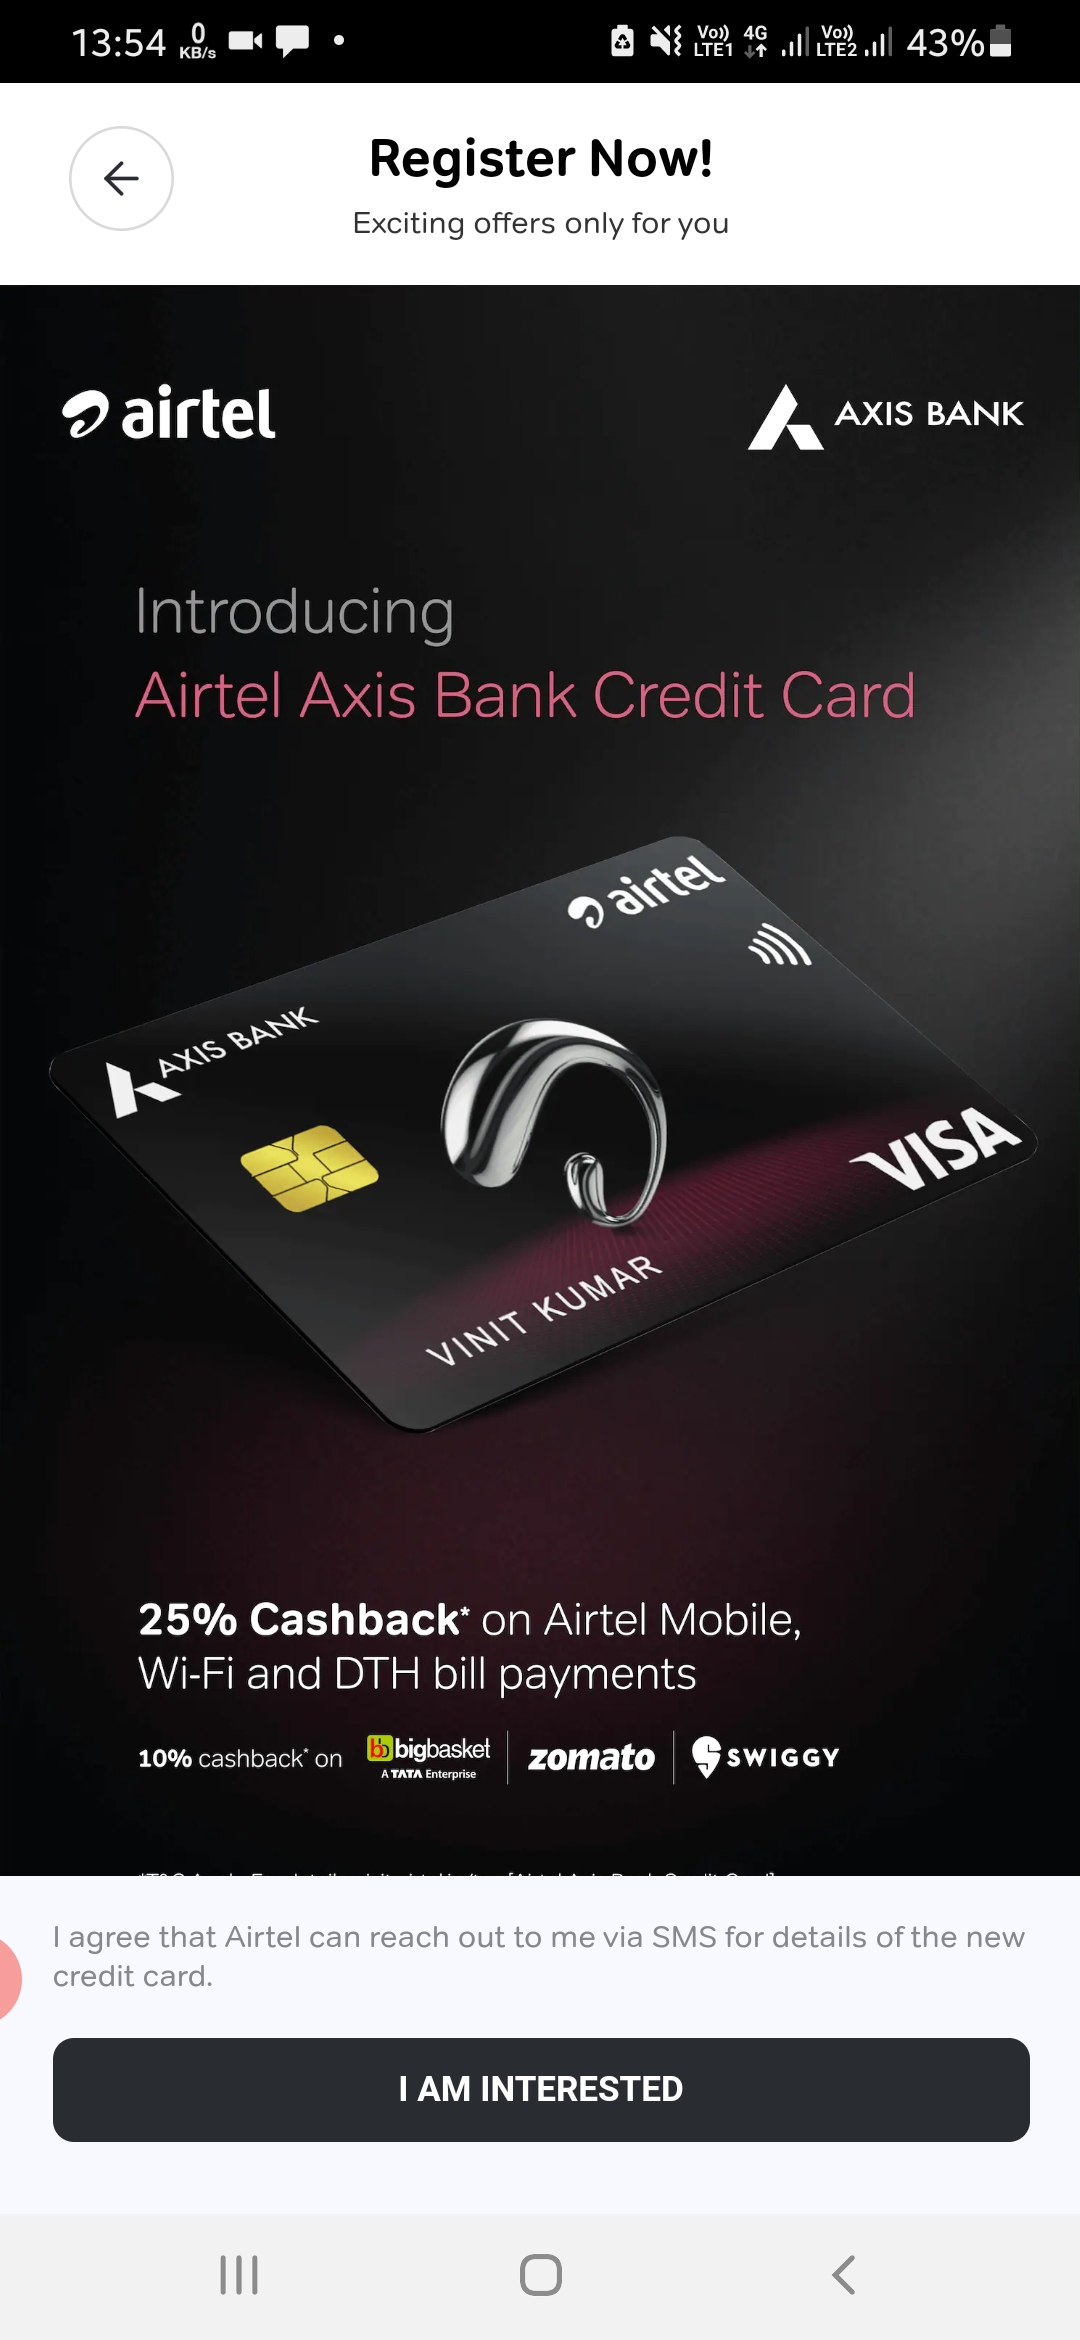 Airtel Launches Credit Card in Partnership With Axis Bank Online